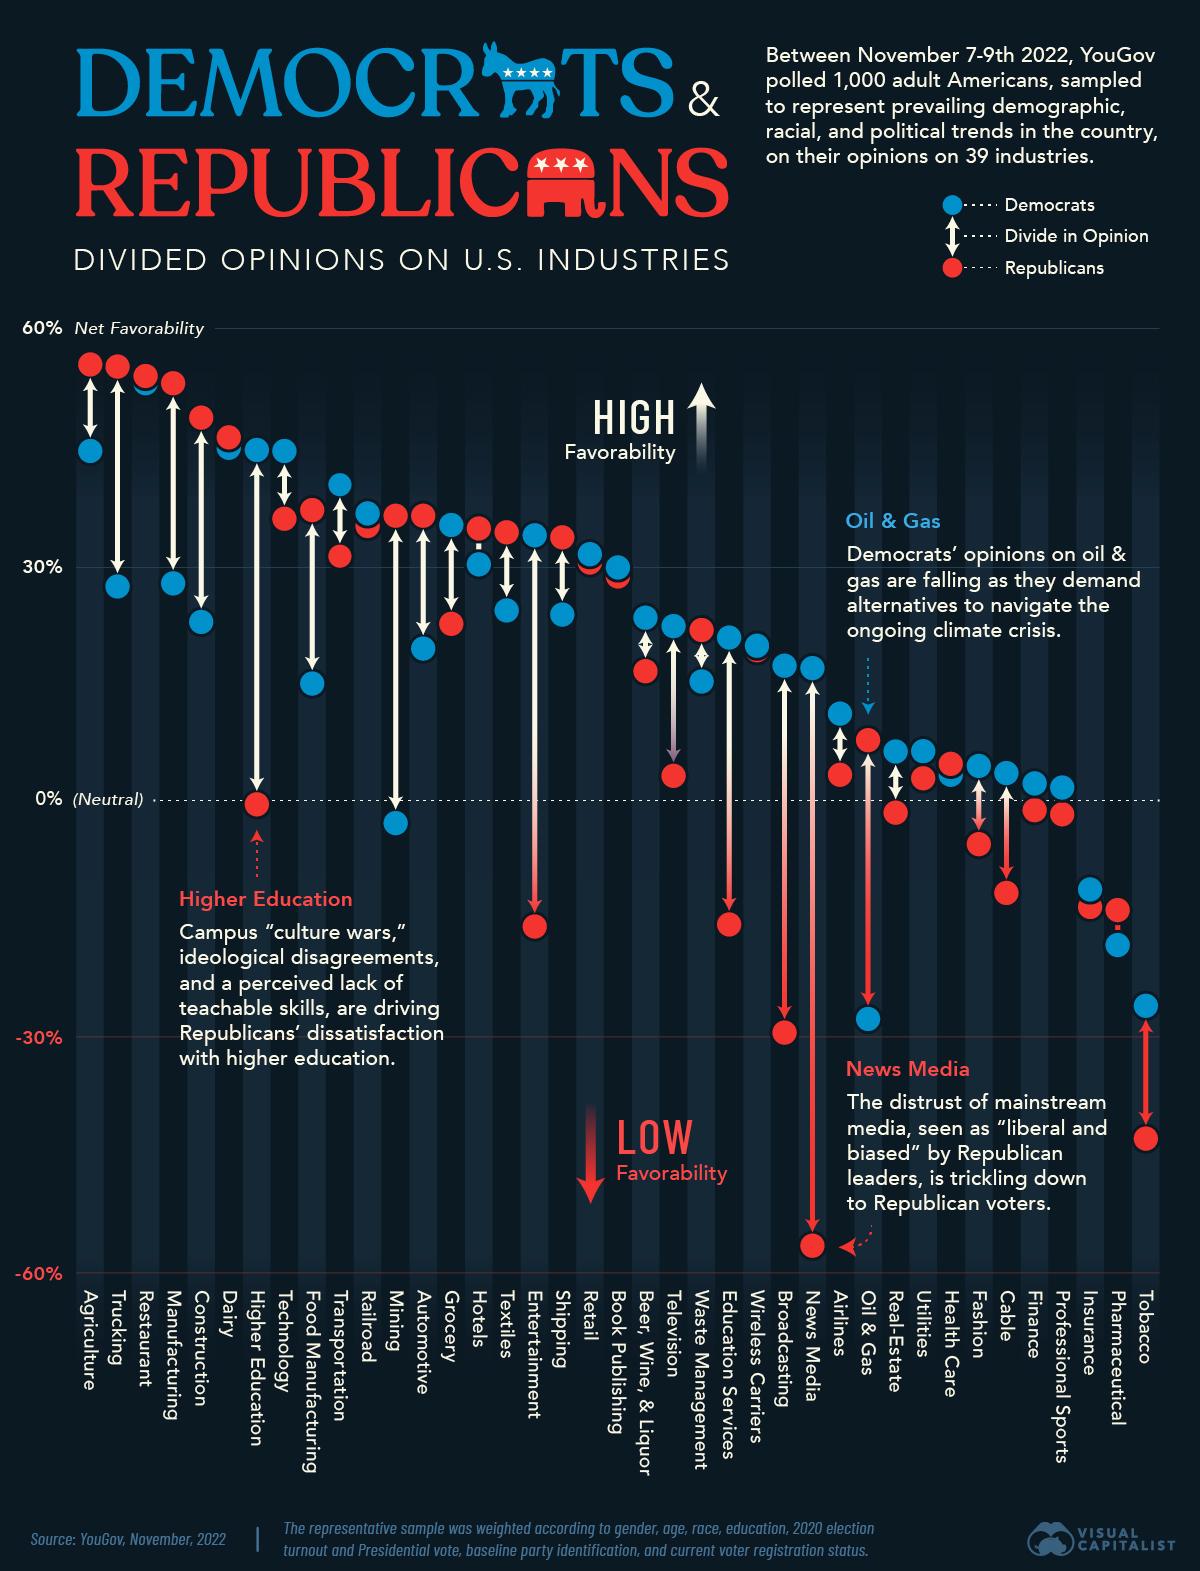 How Do Democrats and Republicans Feel About Certain U.S. Industries?